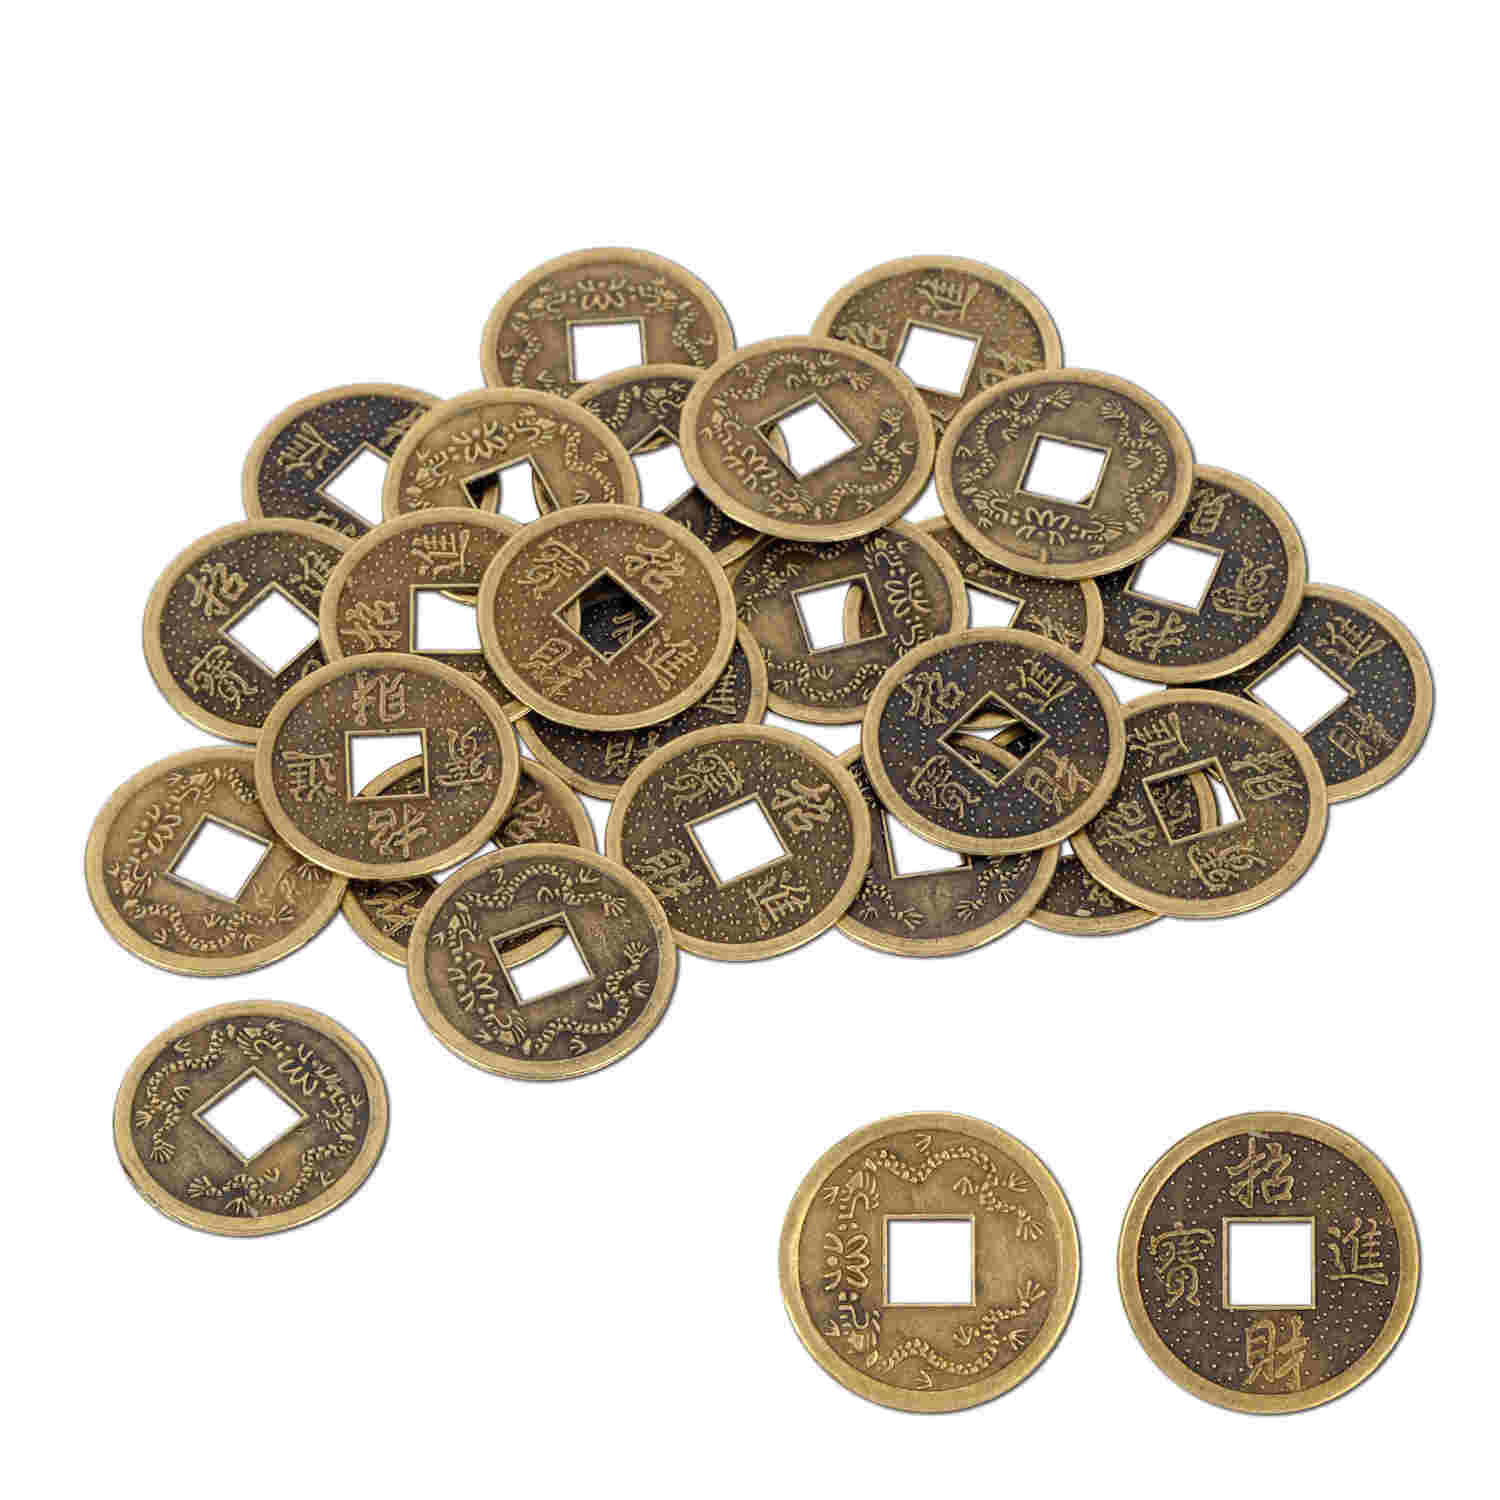 gold coins with a square hole in the middle with Chinese writing on them